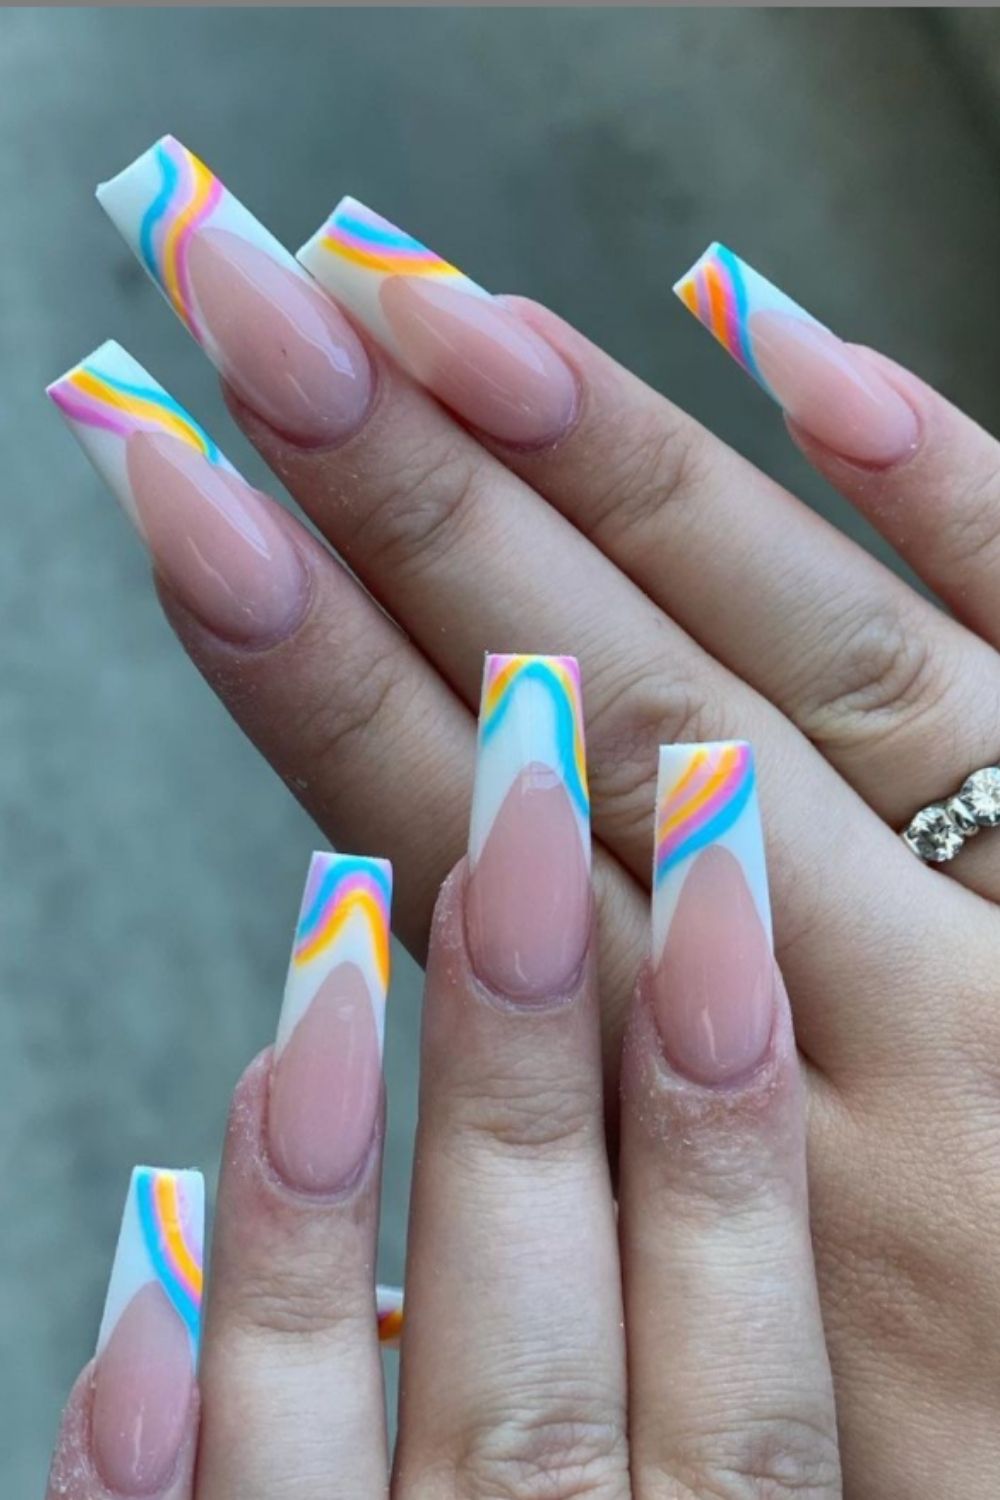 French Acrylic Nails: 40 Modern Nail Designs You Should Try!